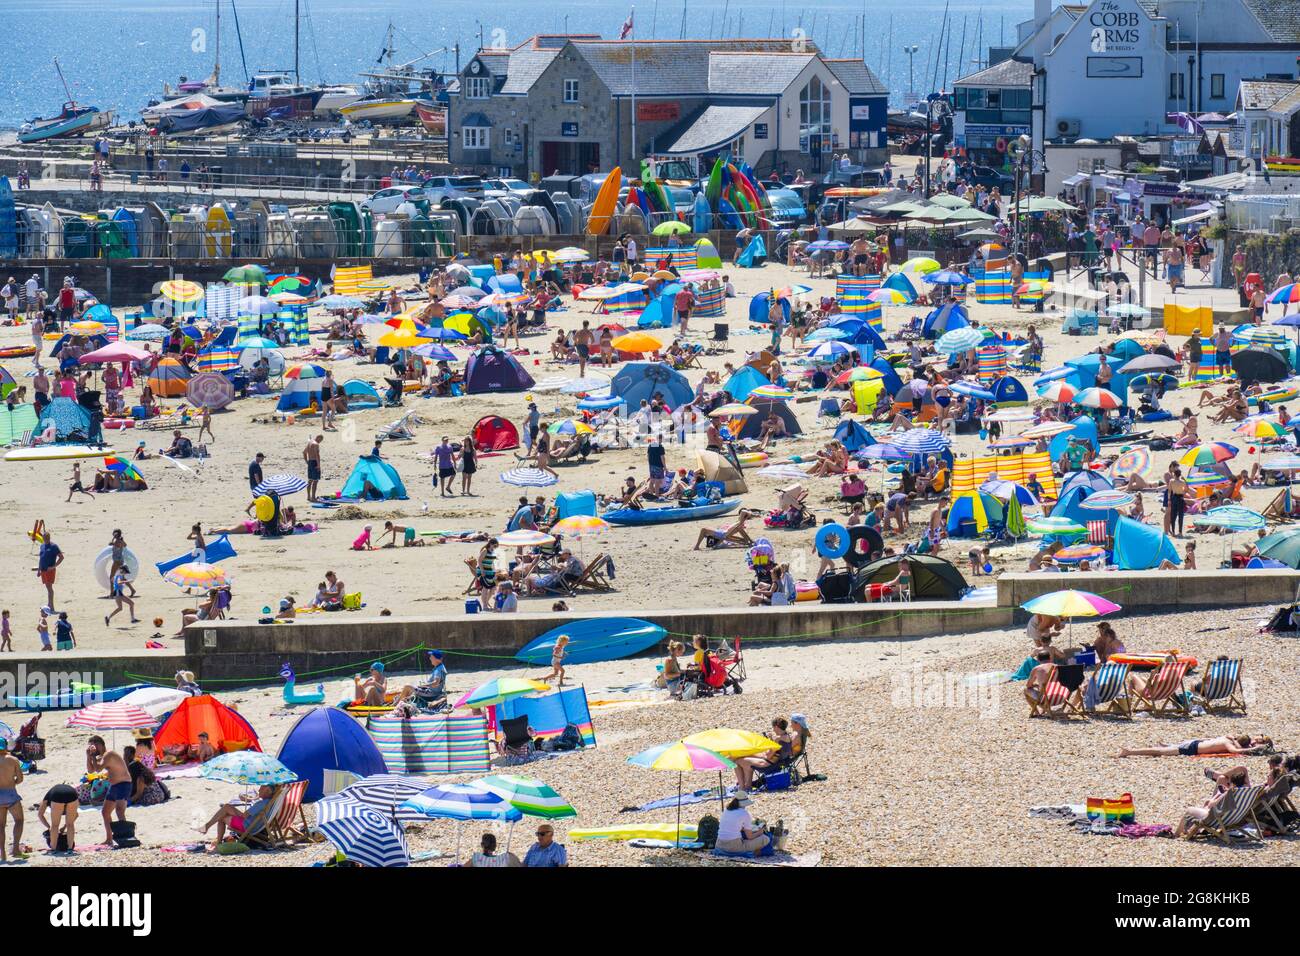 Lyme Regis, Dorset, UK. 21st July, 2021. UK Weather: Crowds of beachgoers packed out the picturesque beach at the seaside resort of Lyme Regis as temperatures soared towards 30 degrees centigrade again this afternoon. Holiday makers and beachgoers sweltered in record breaking temperatures as the Met Office extended the amber warning of 'Extreme Heat' as the heatwave continues to the end of the week. Credit: Celia McMahon/Alamy Live News Stock Photo